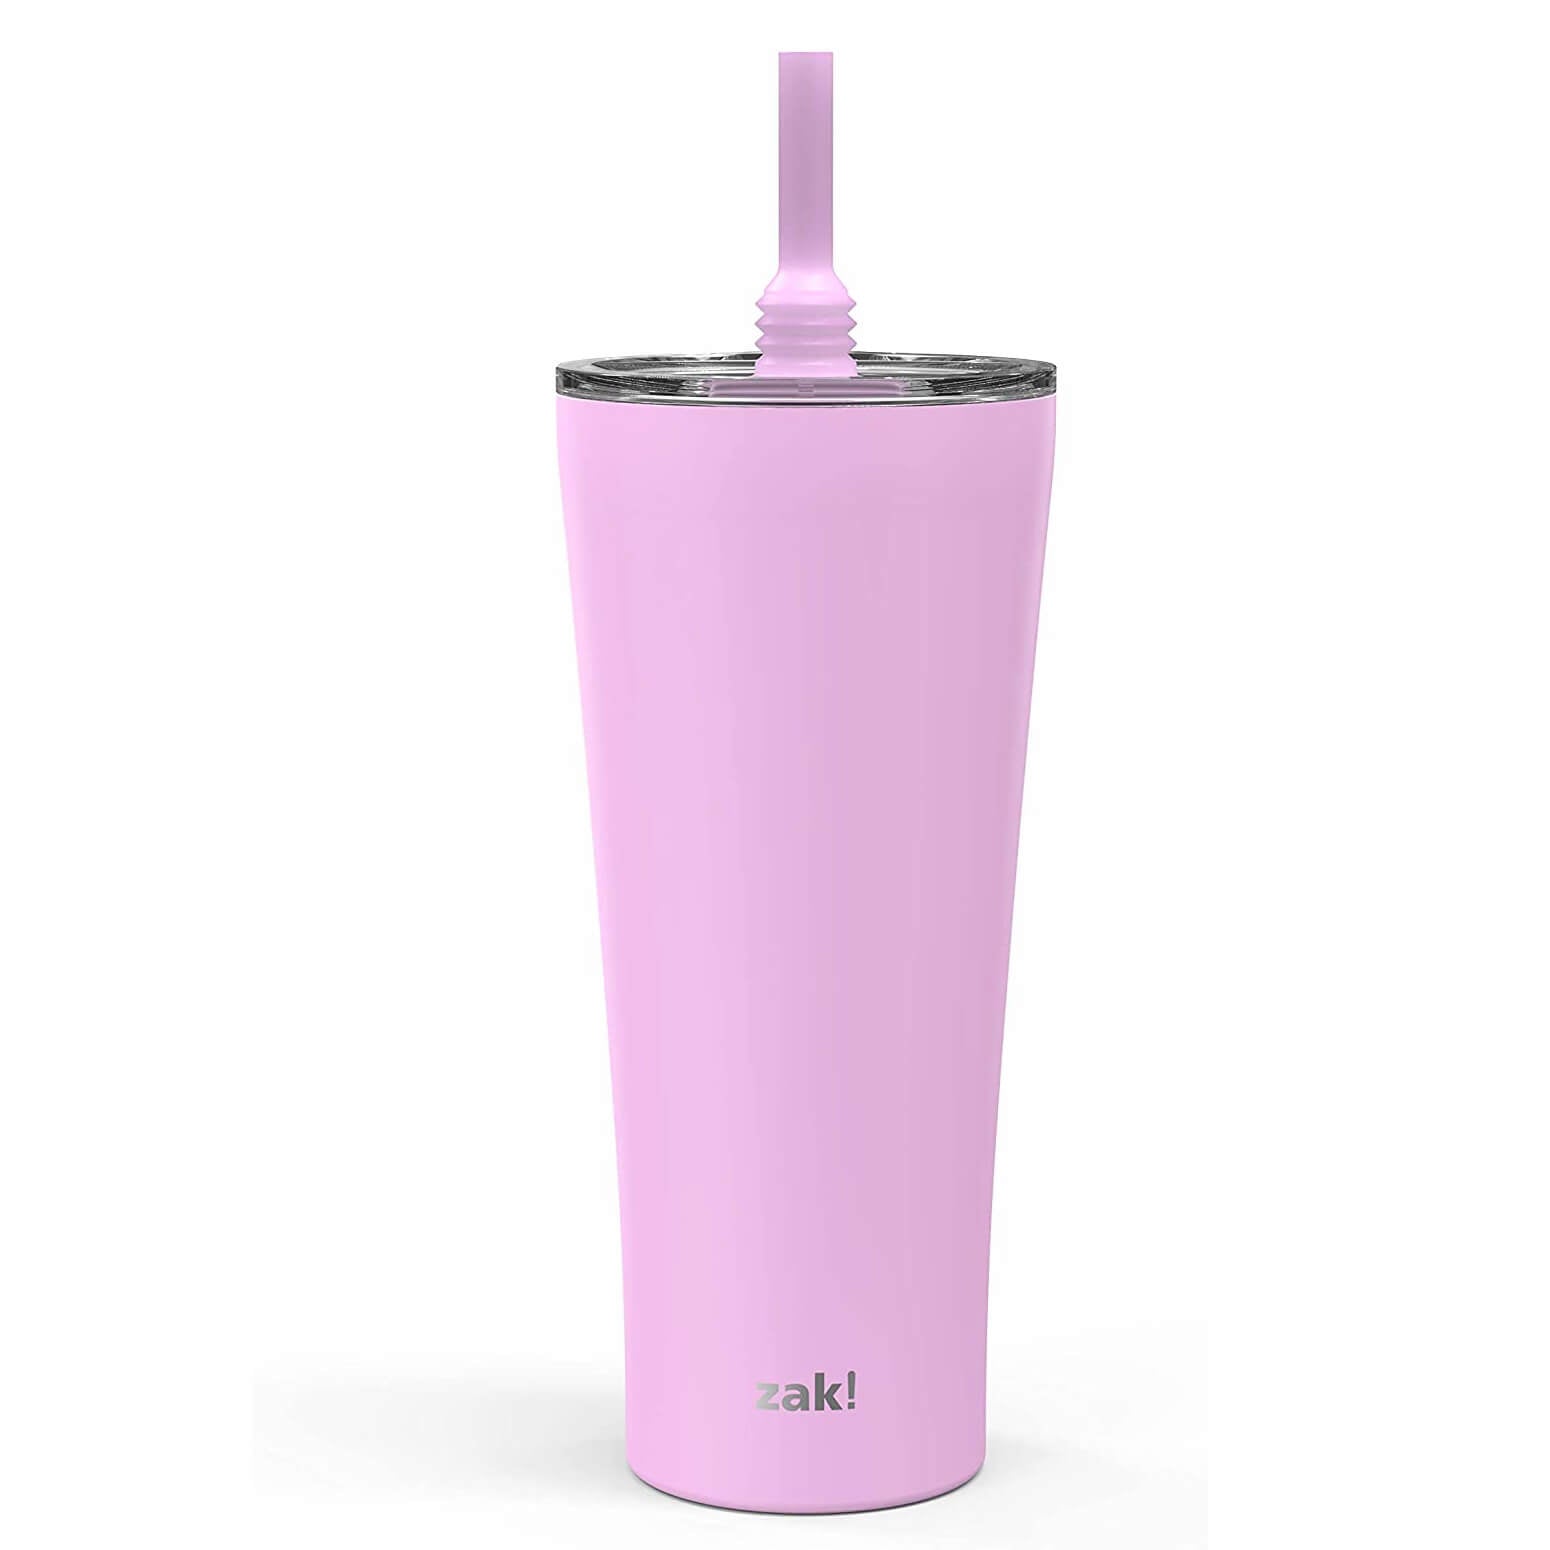 Alfalfa Vacuum Insulated Stainless Steel Straw Tumbler - Lilac, 30 Ounce